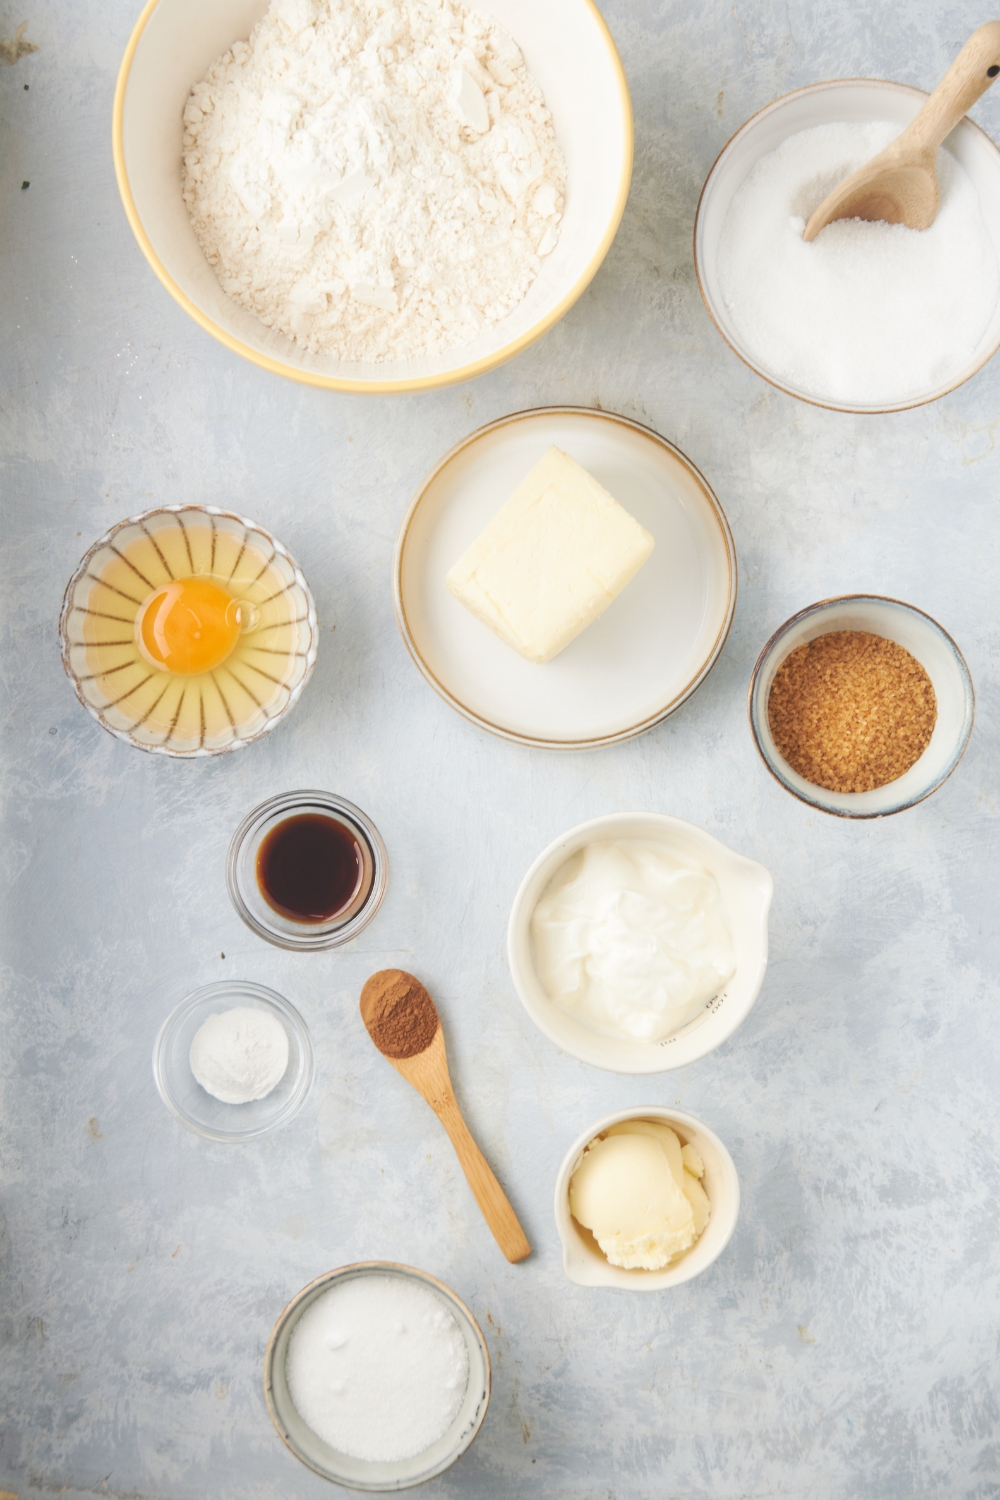 flour, an egg, vanilla, butter, buttermilk, all in separate bowls on a white counter